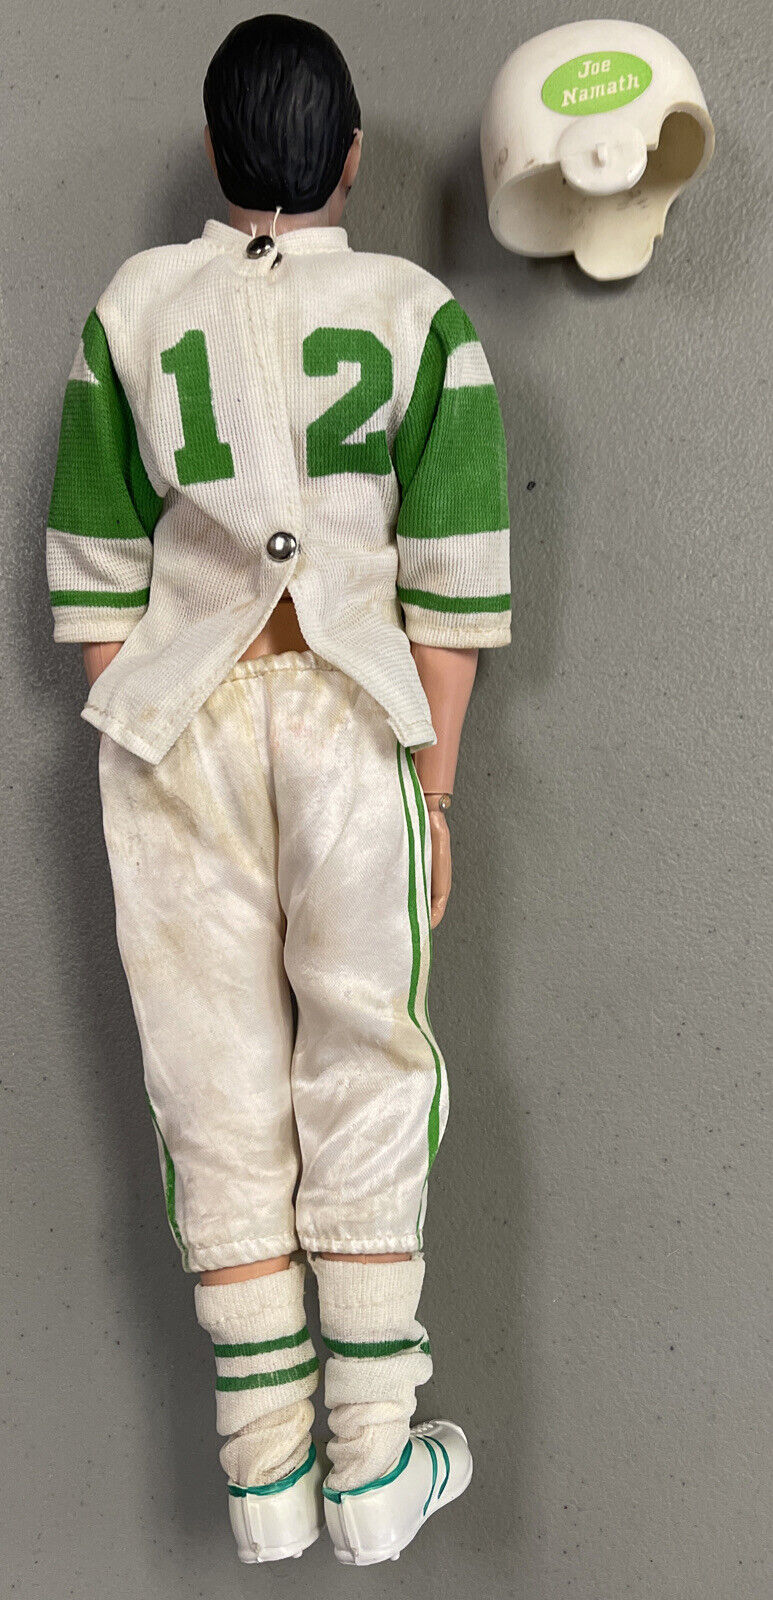 1970 Mego Joe Namath 12” Action Figure With Wardrobe Accessories Collection